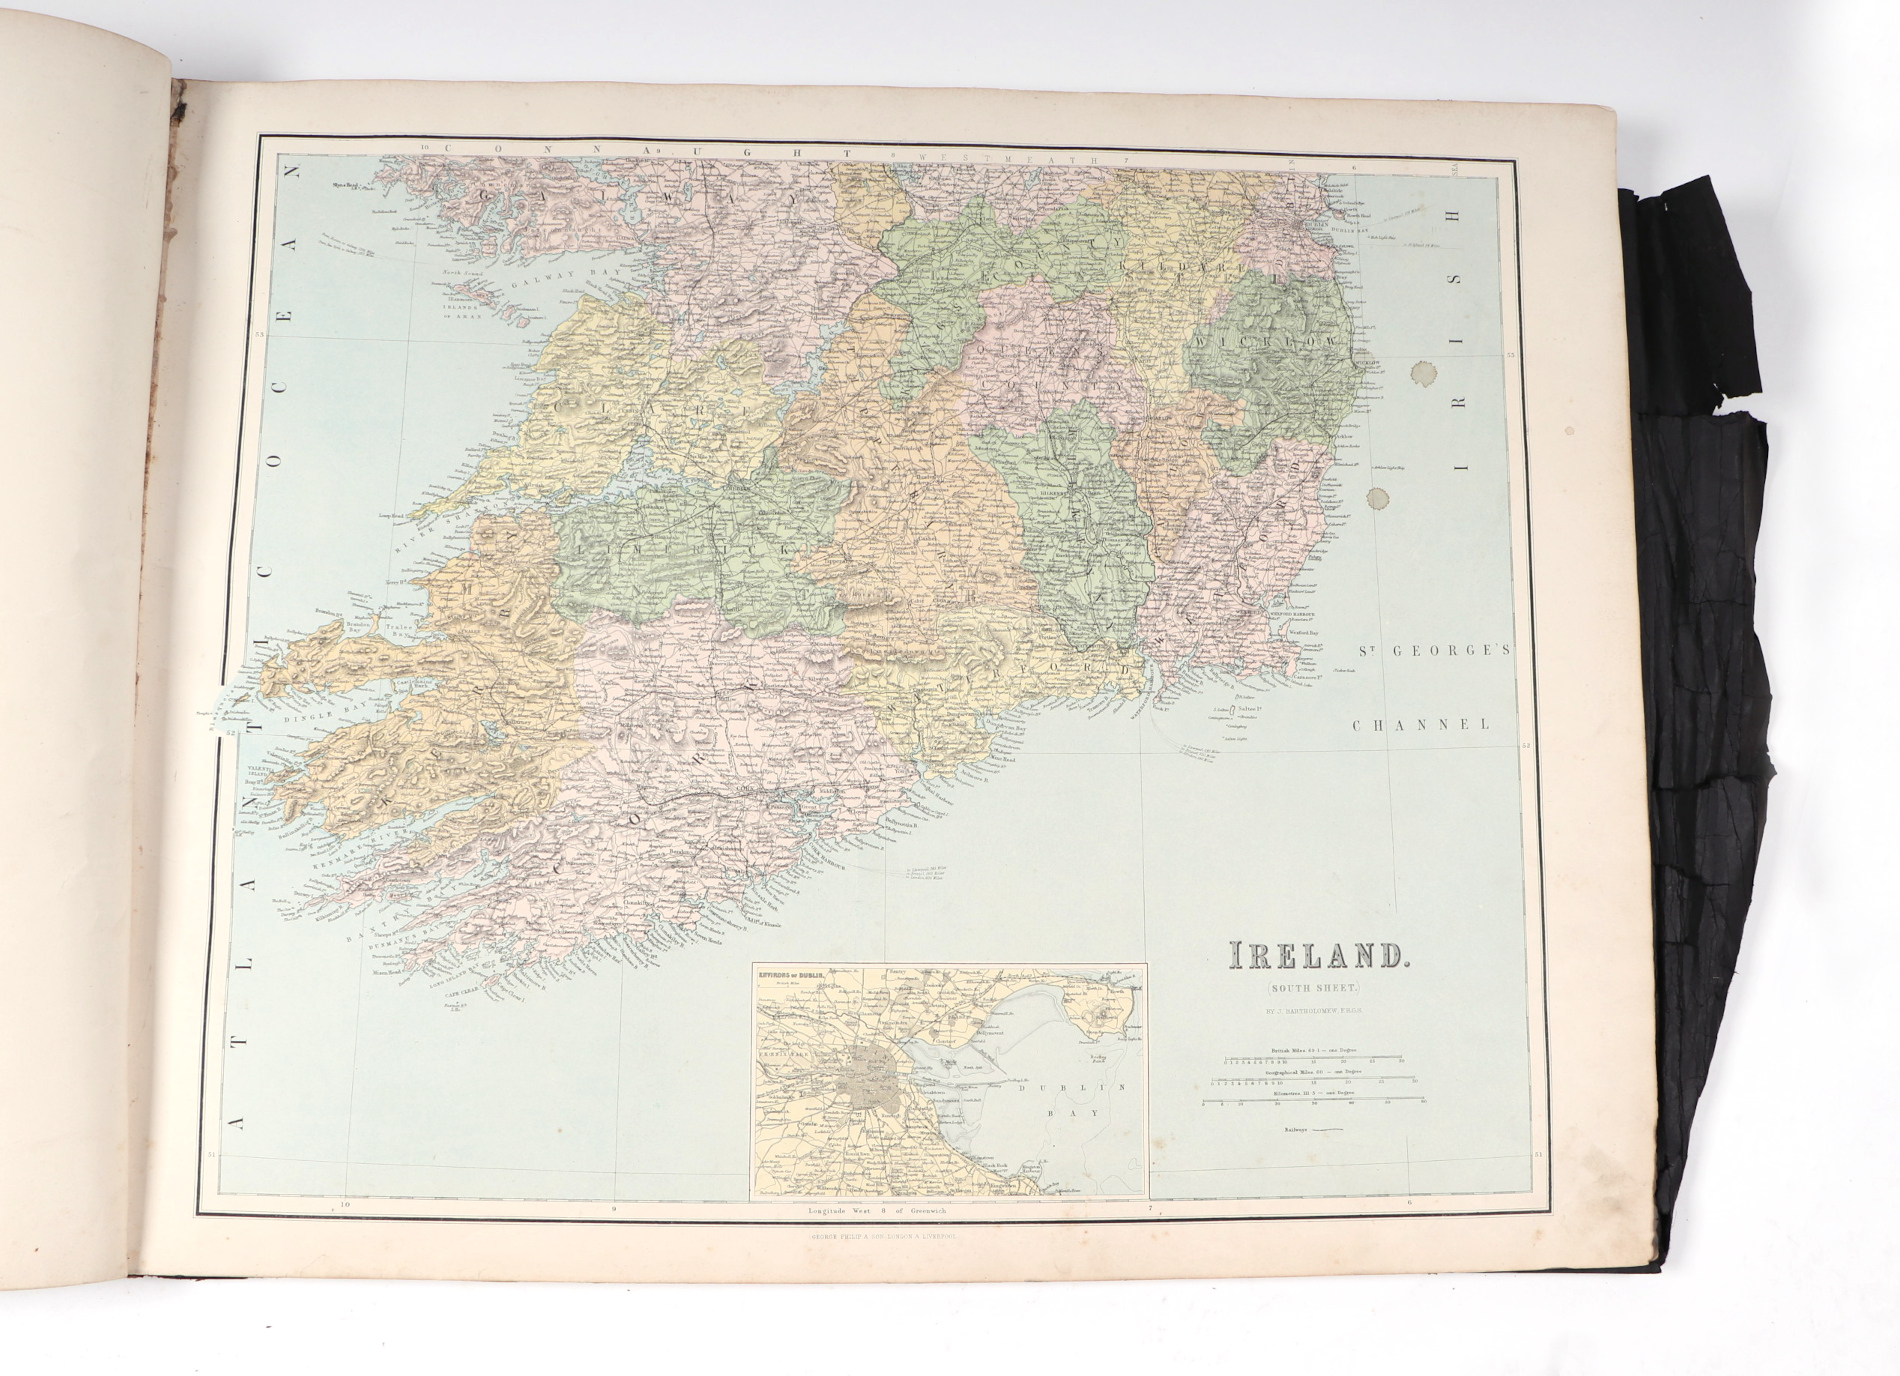 A late 19th century J. Bartholomew World Atlas published by George Philip & Son, London & Liverpool, - Image 3 of 5